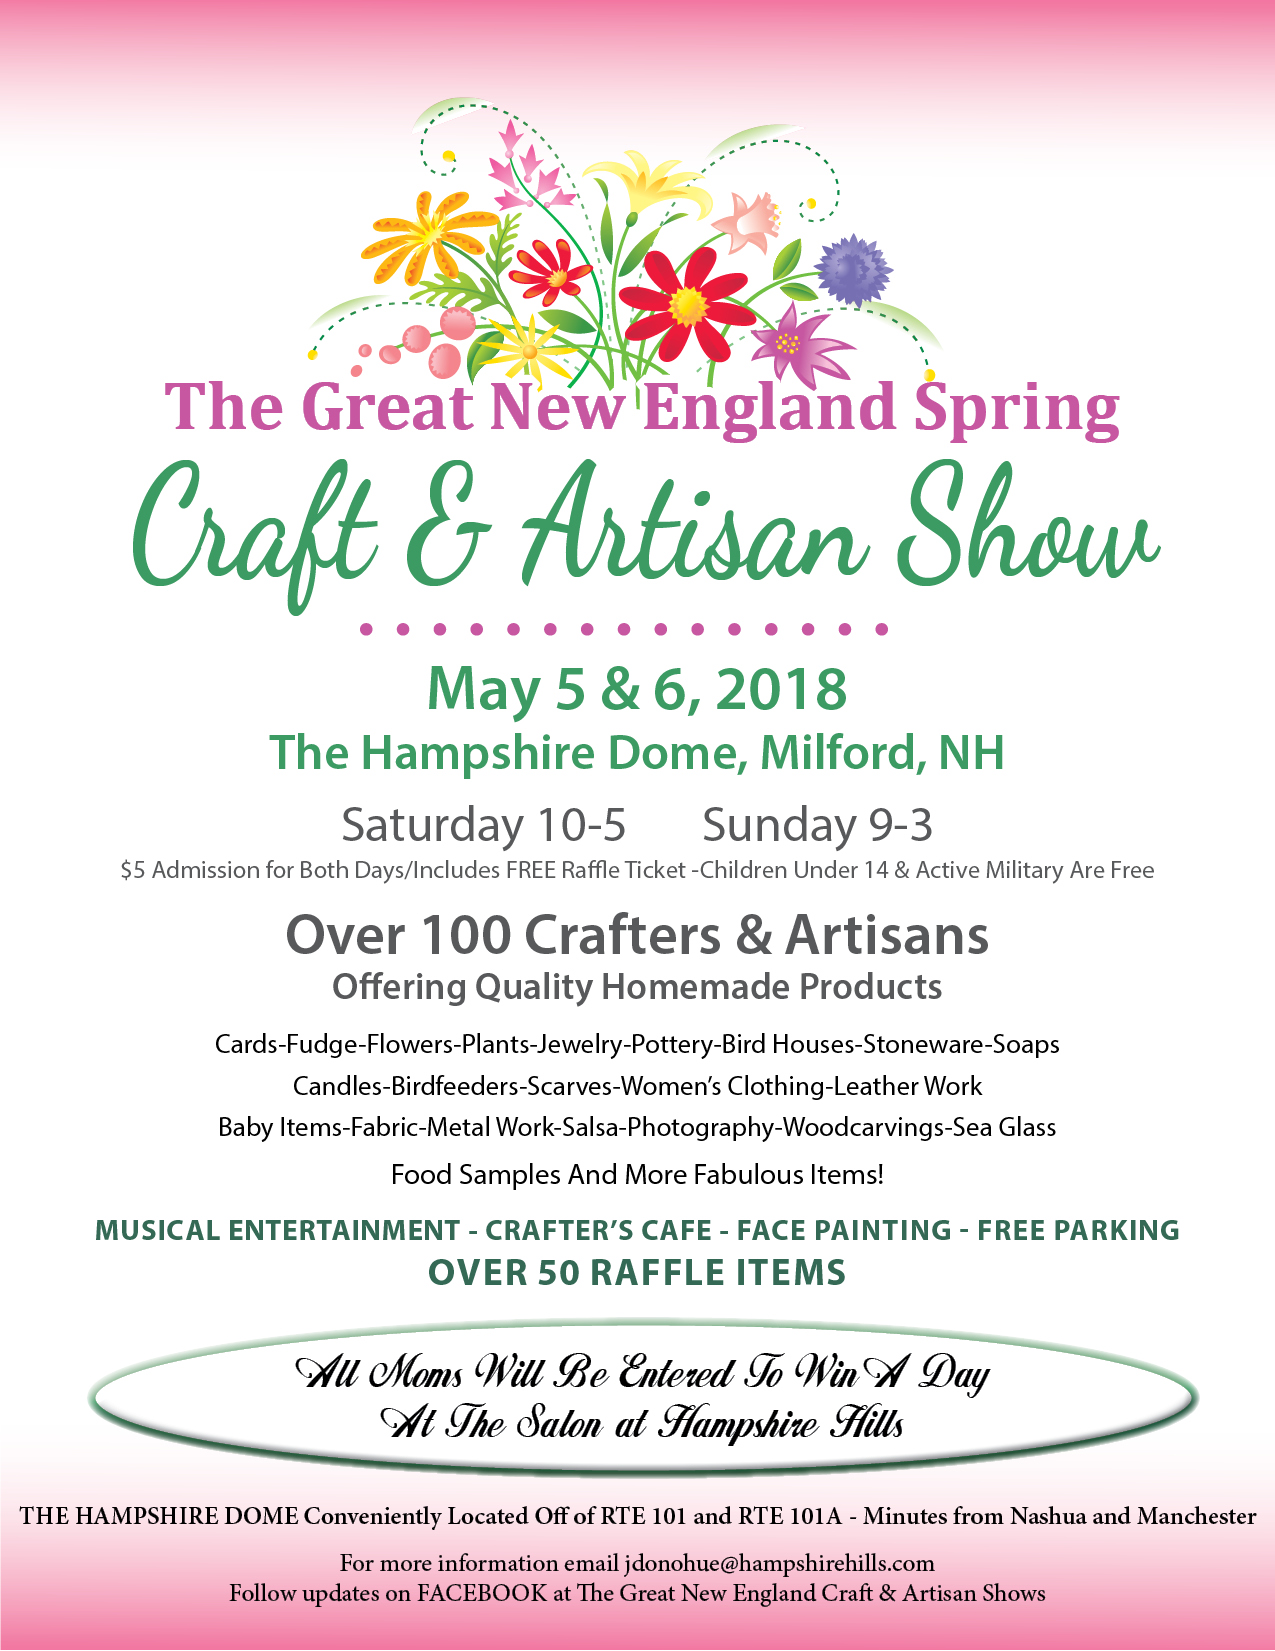 The Great New England Spring Craft & Artisan Show flyer